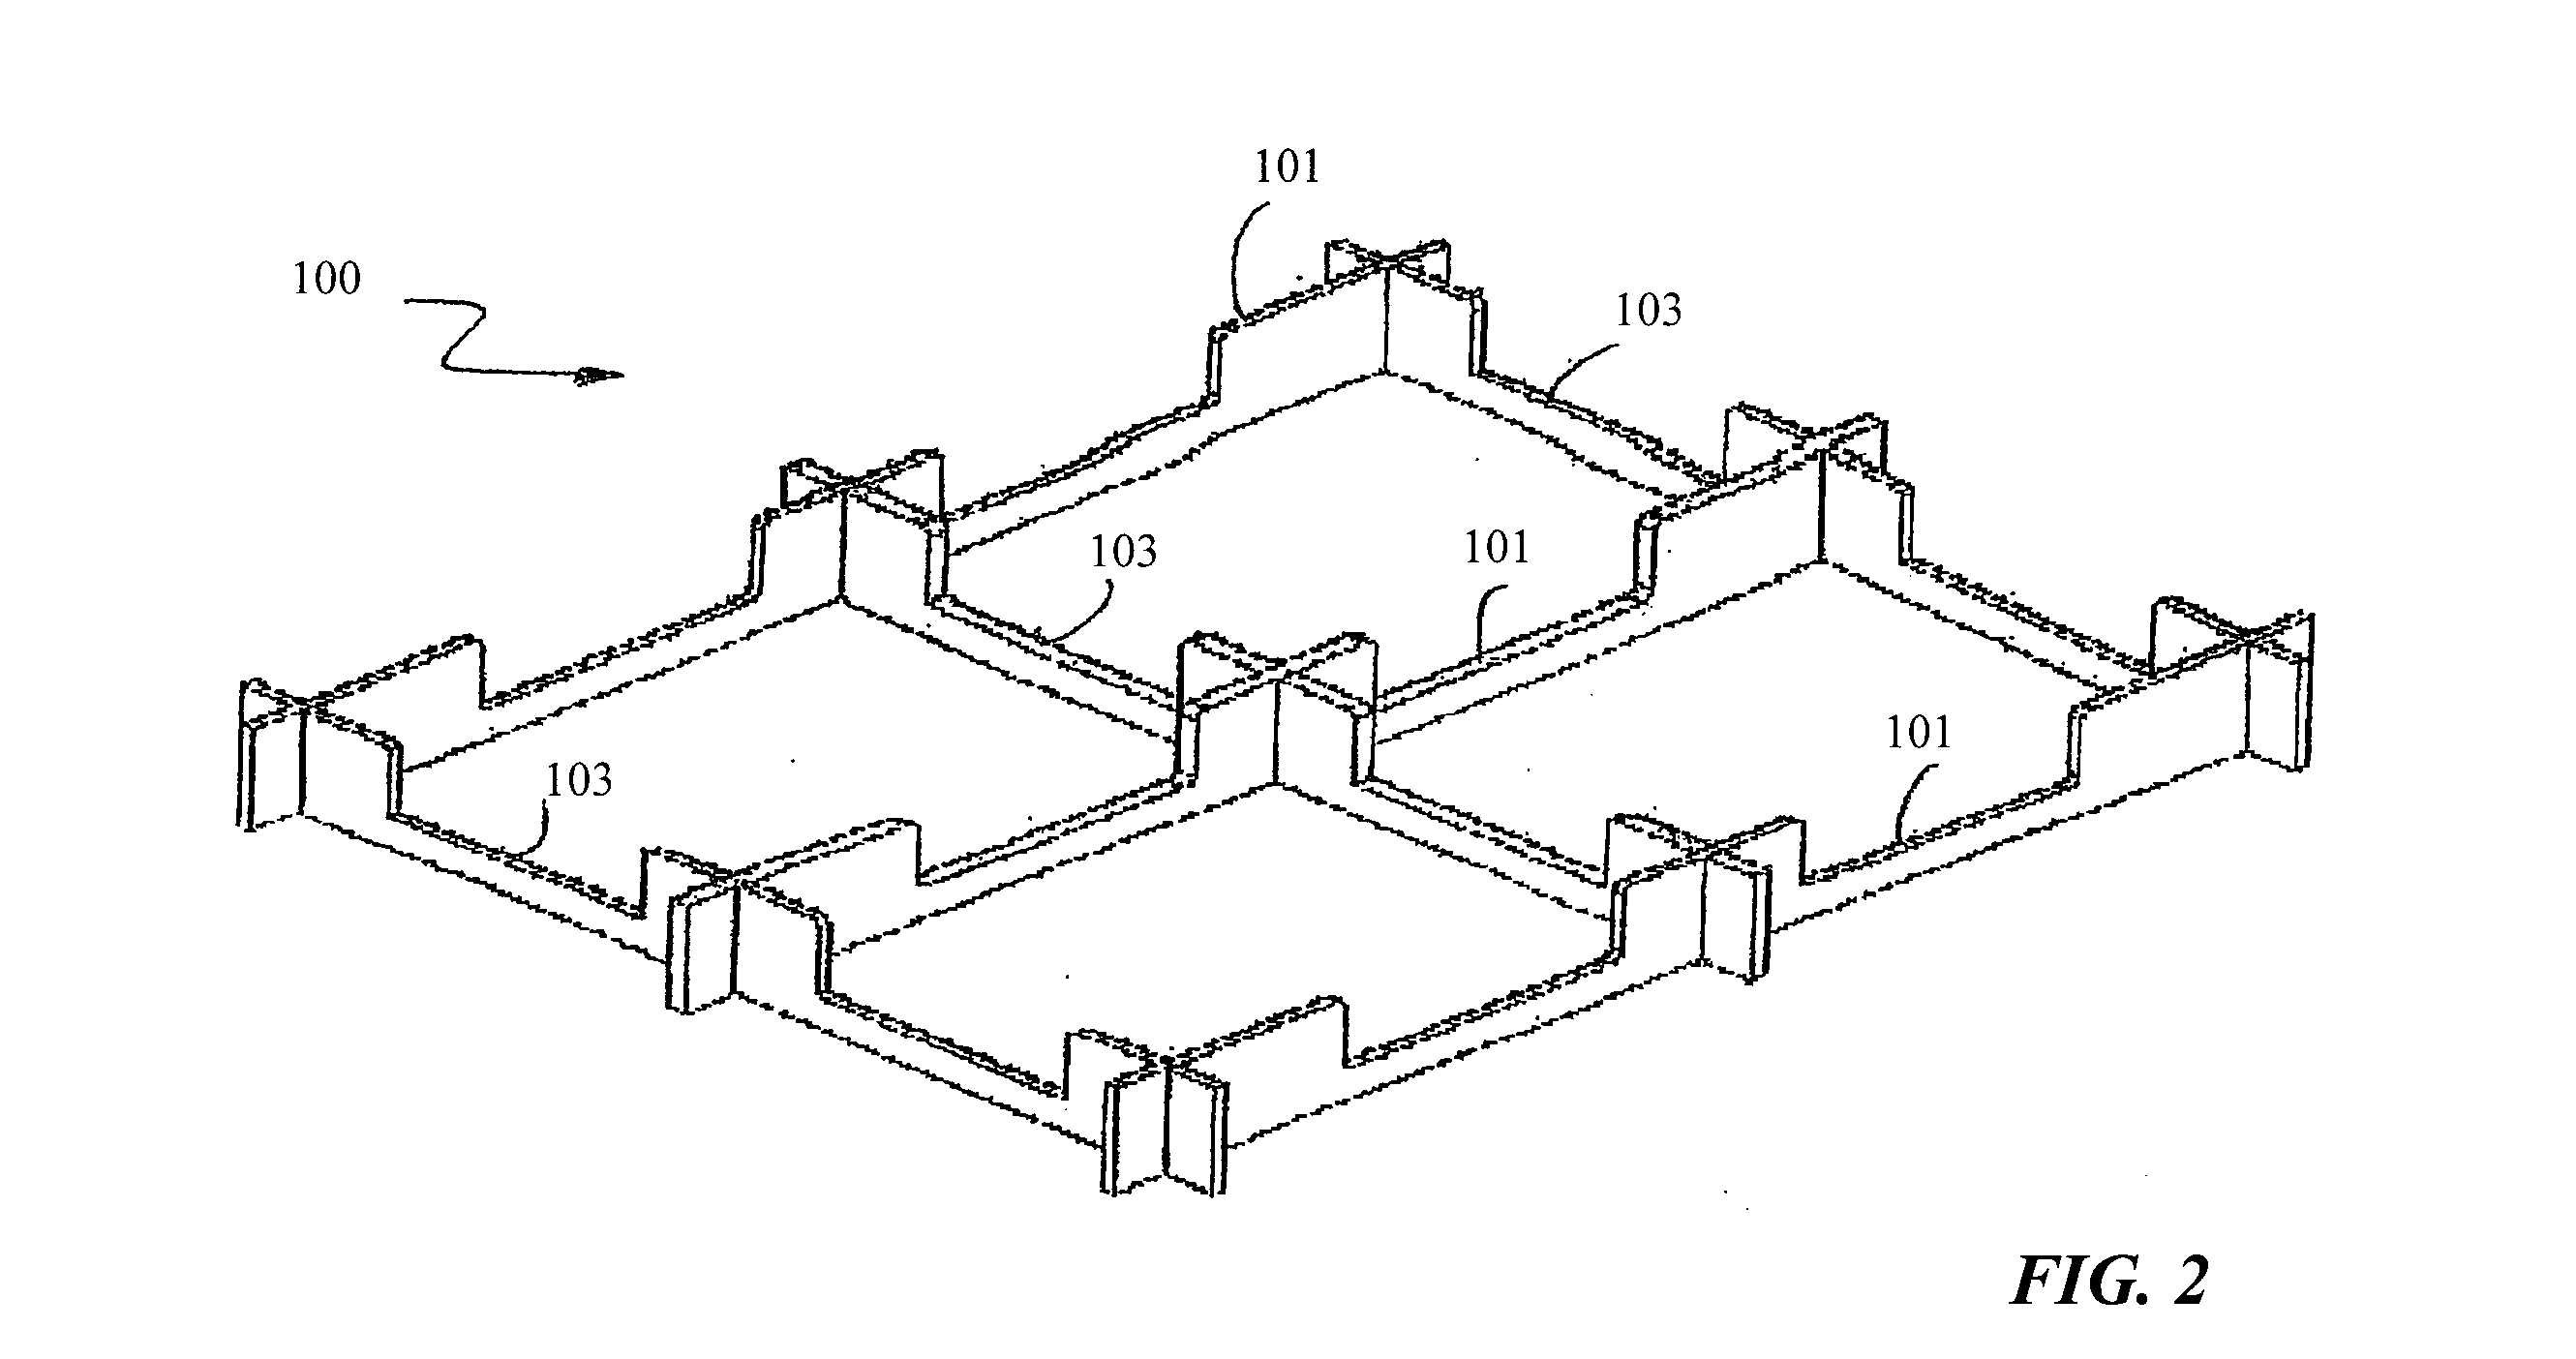 Support device for materials handling